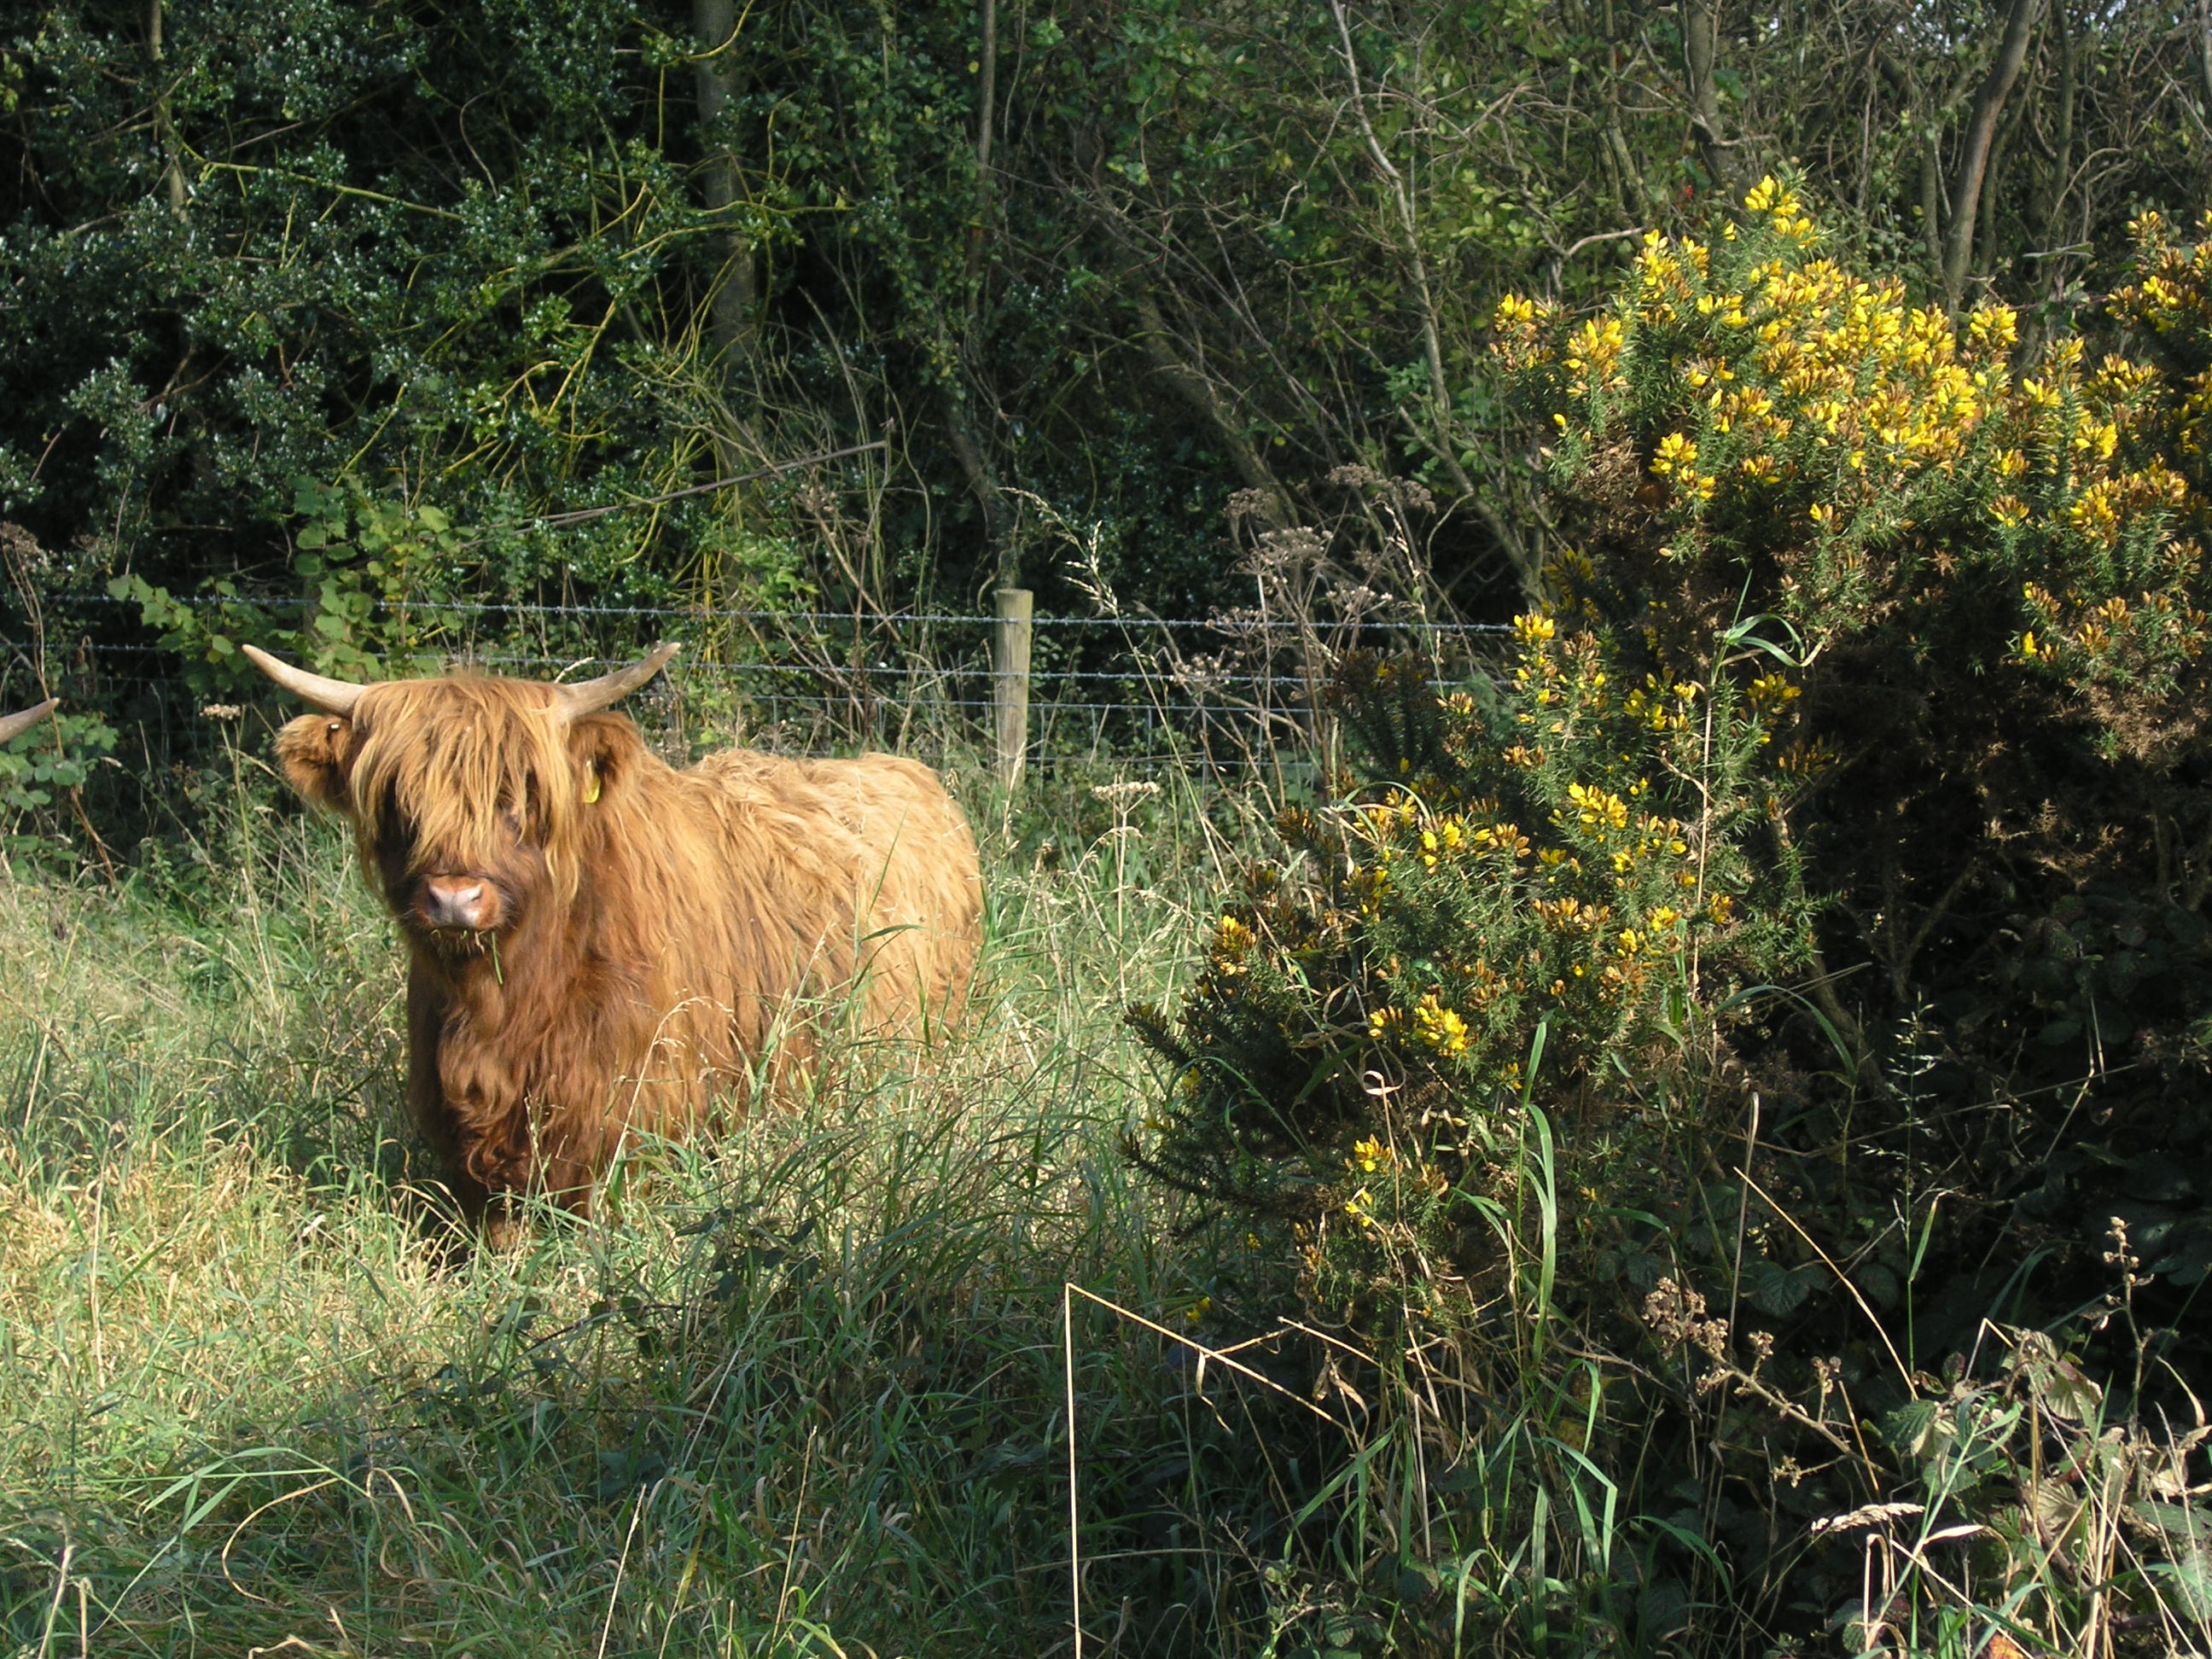 Highland cow, looking towards camera, surrounded by tall grass and yellow flowers on a bush.